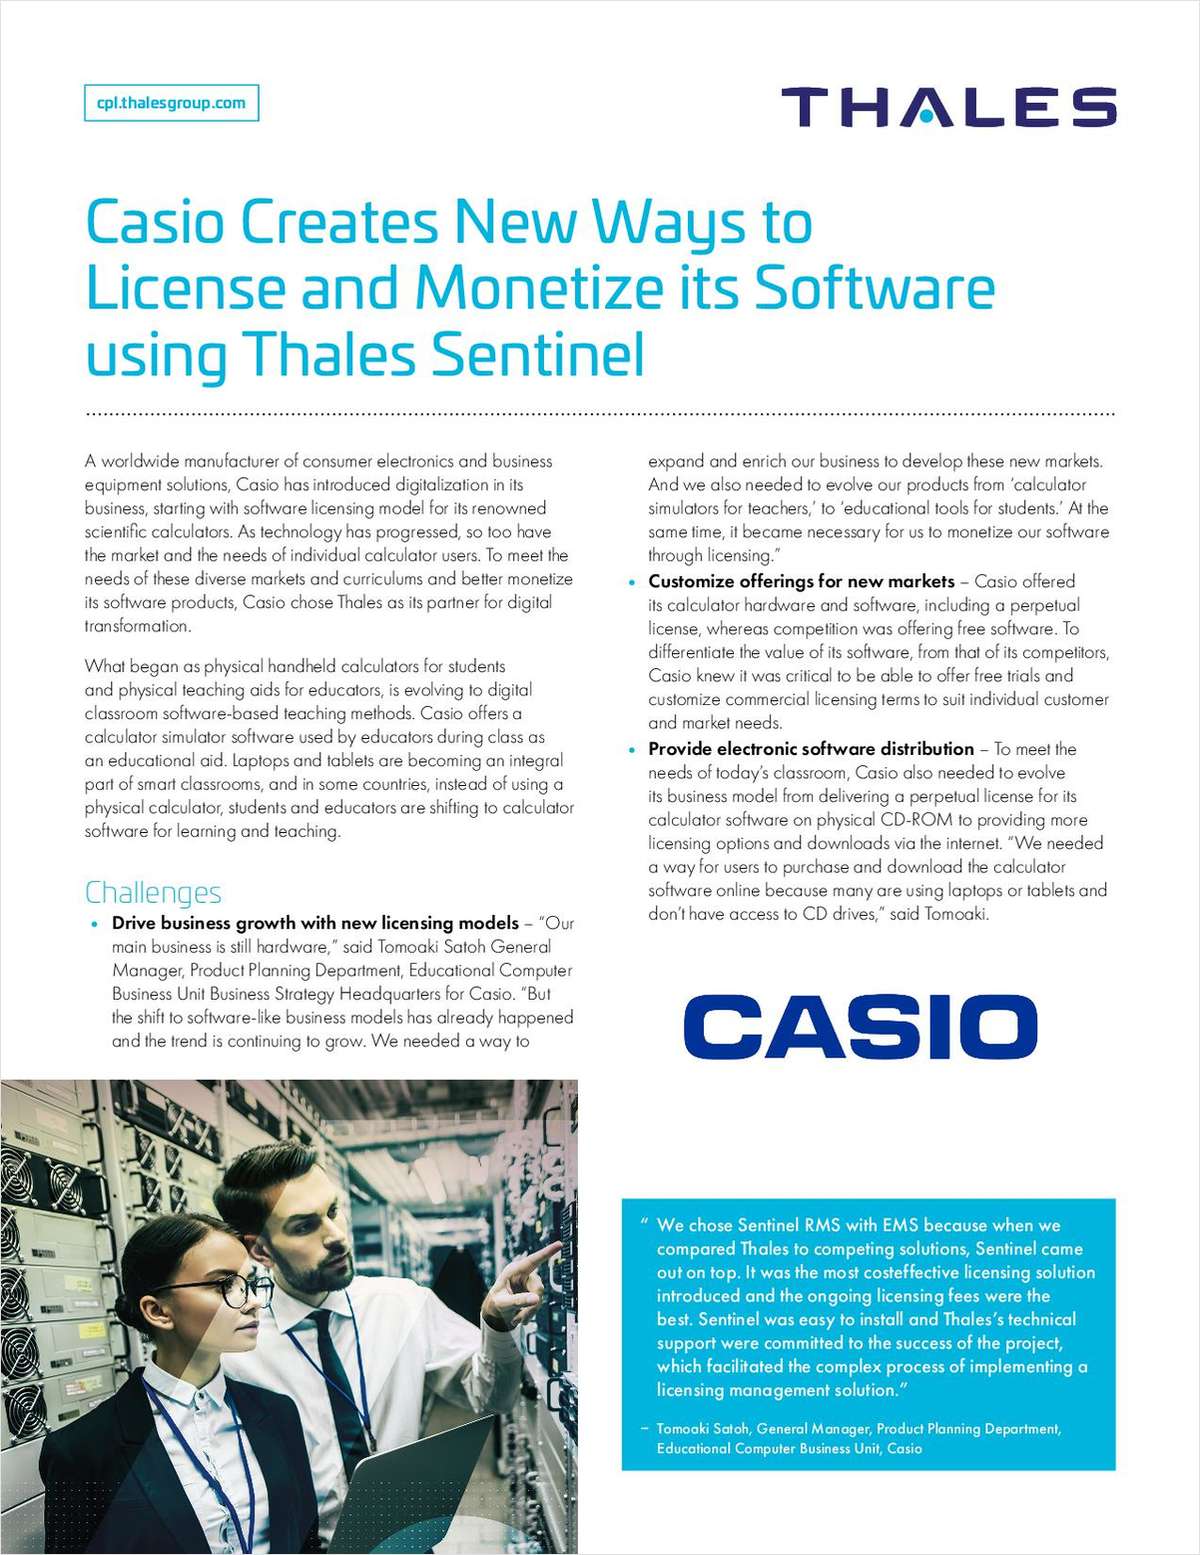 Casio Creates New Ways to License and Monetize its Software using Thales Sentinel